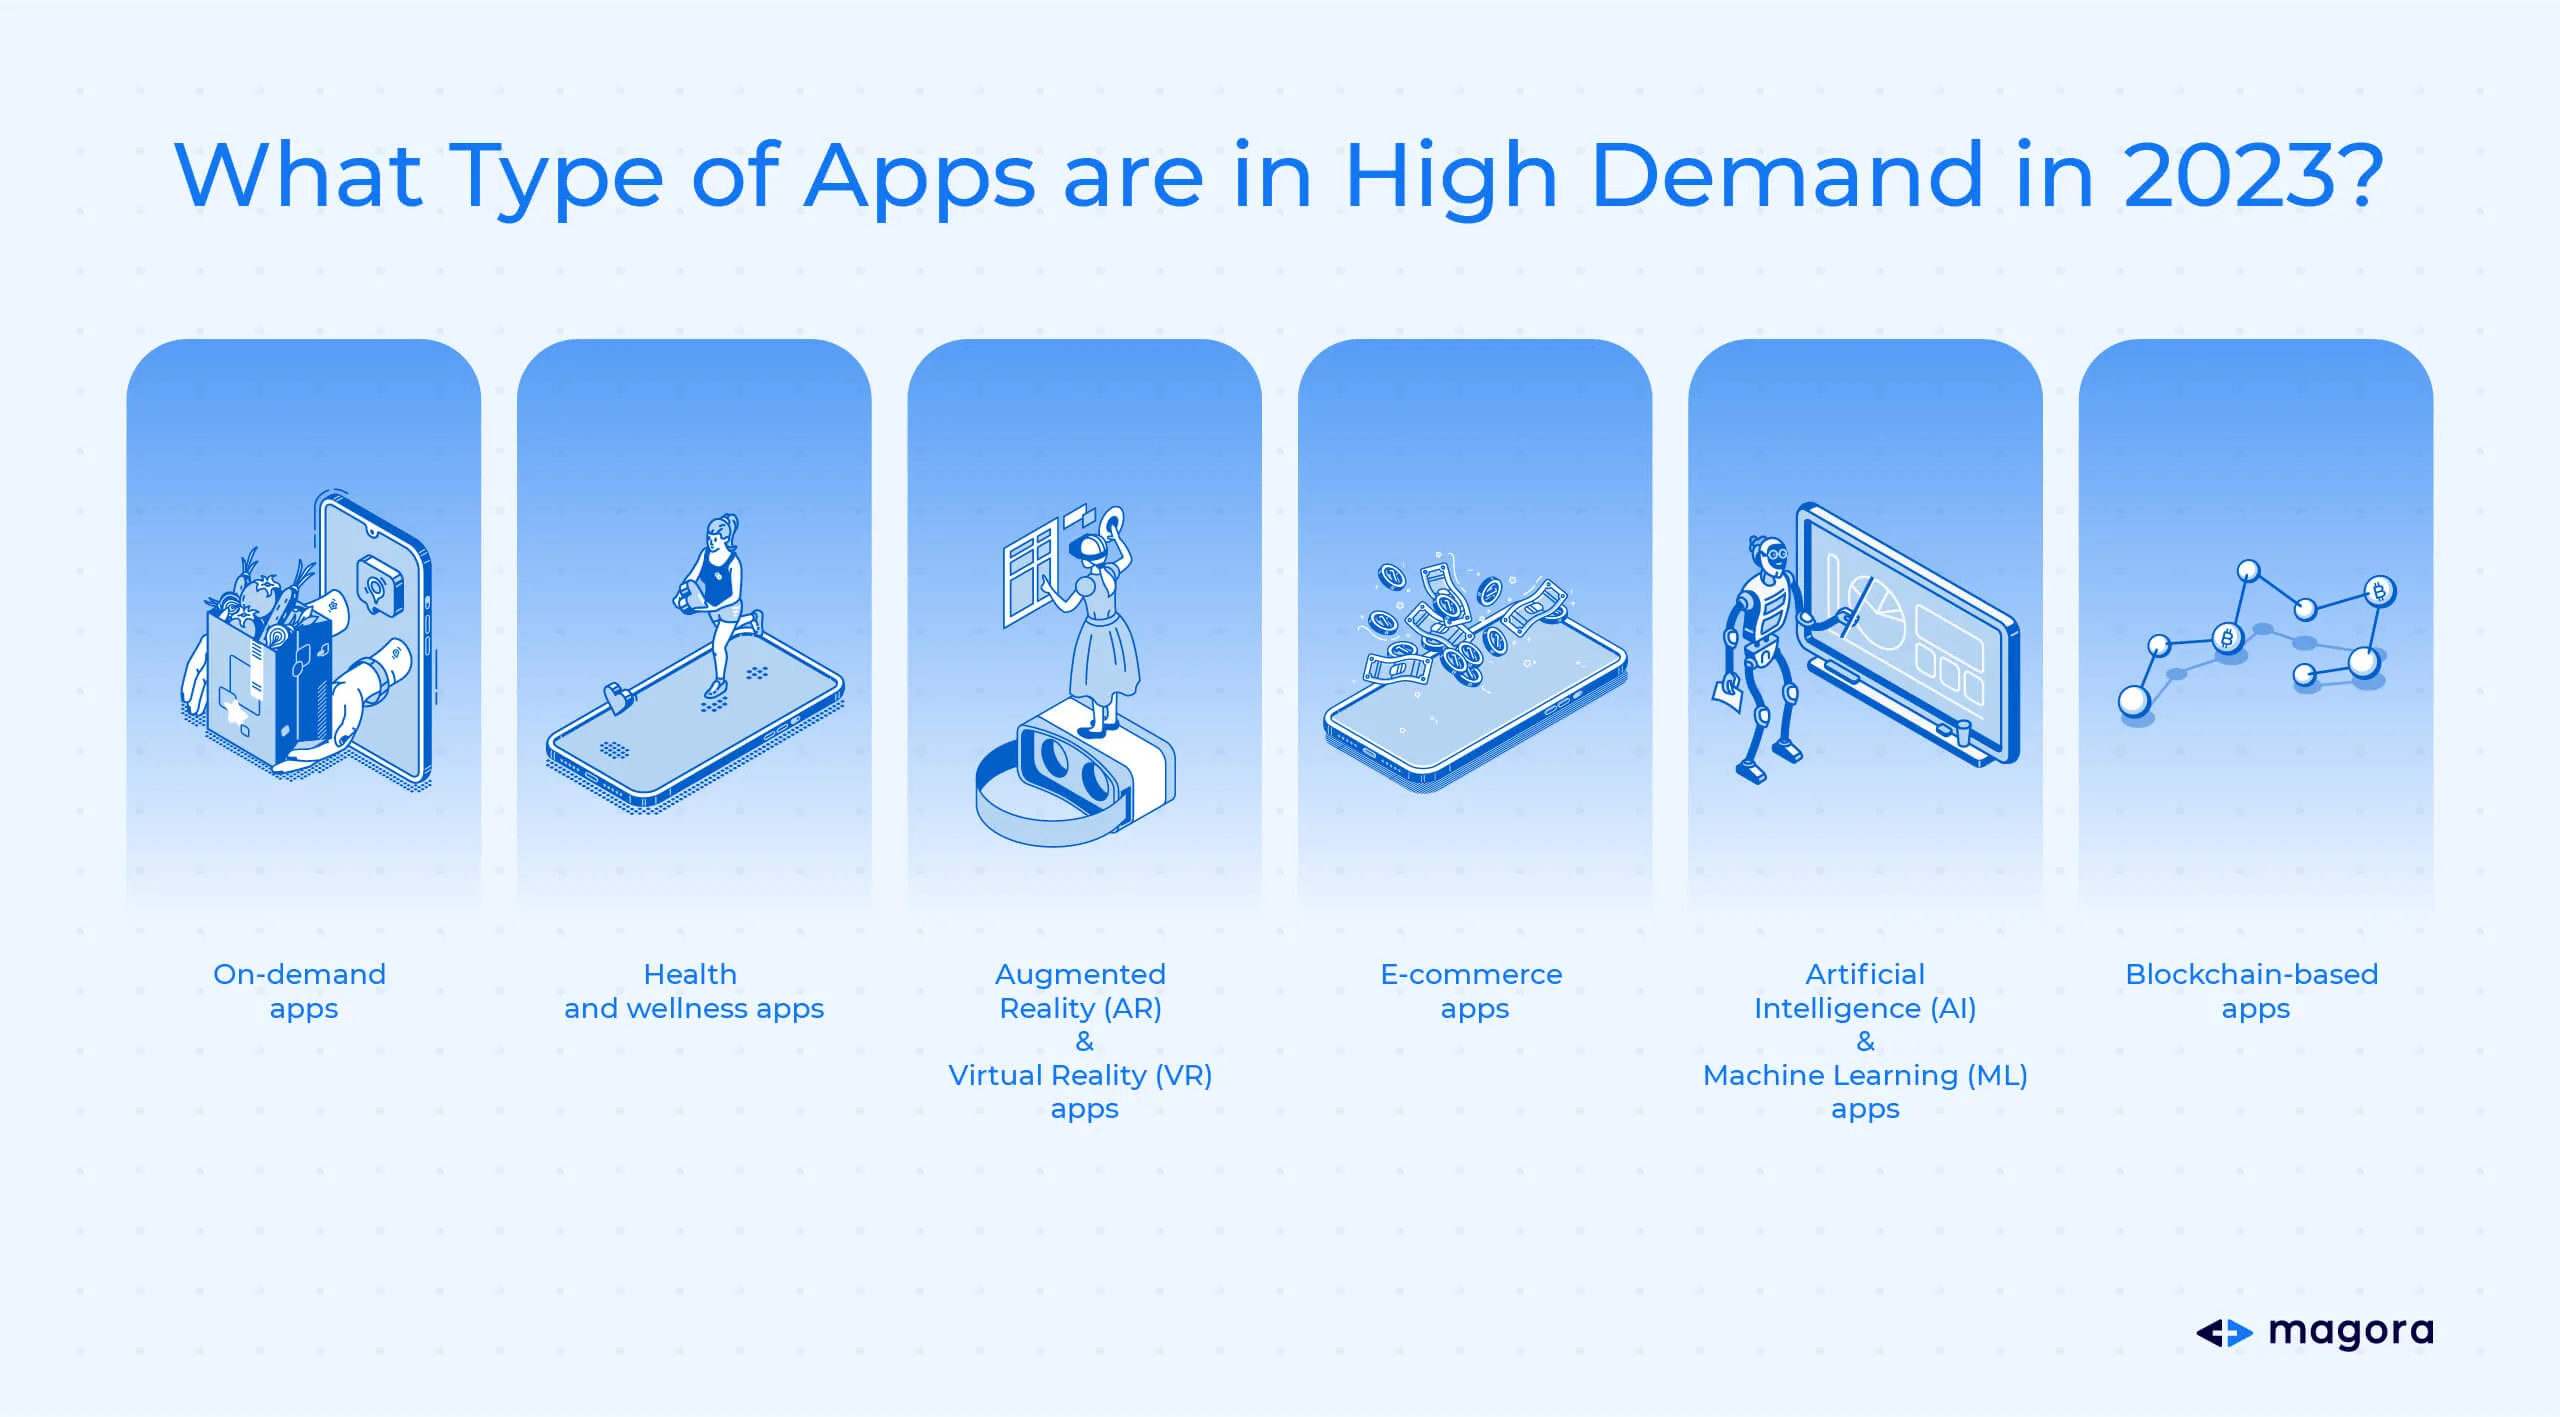 What type of apps are in high demand in 2023